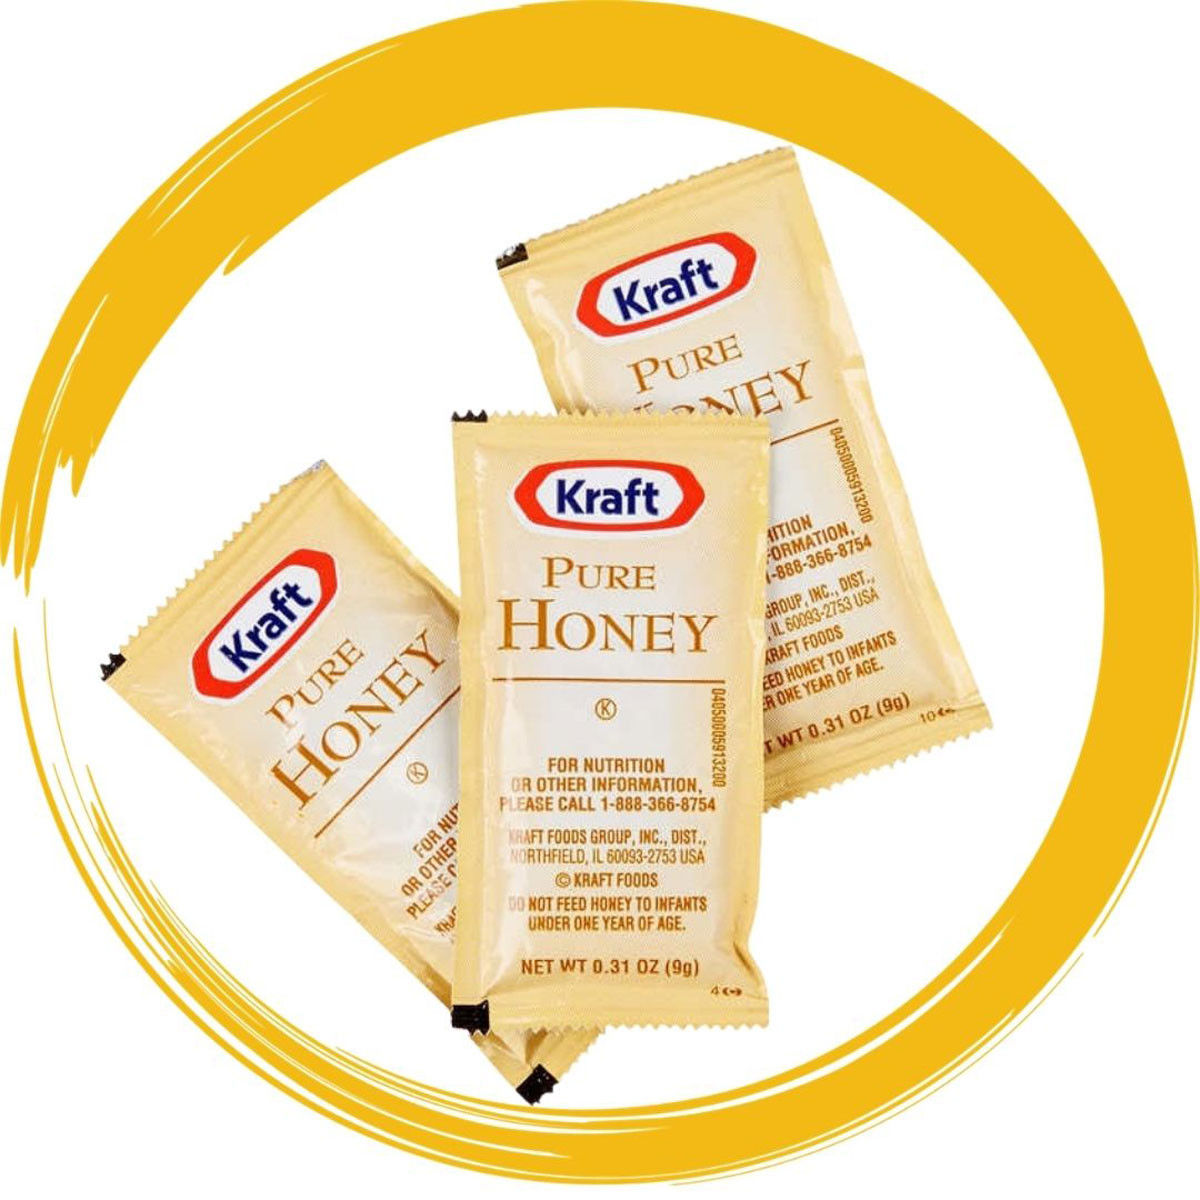 What advantages does the kraft pure honey packets (100 count) offer?